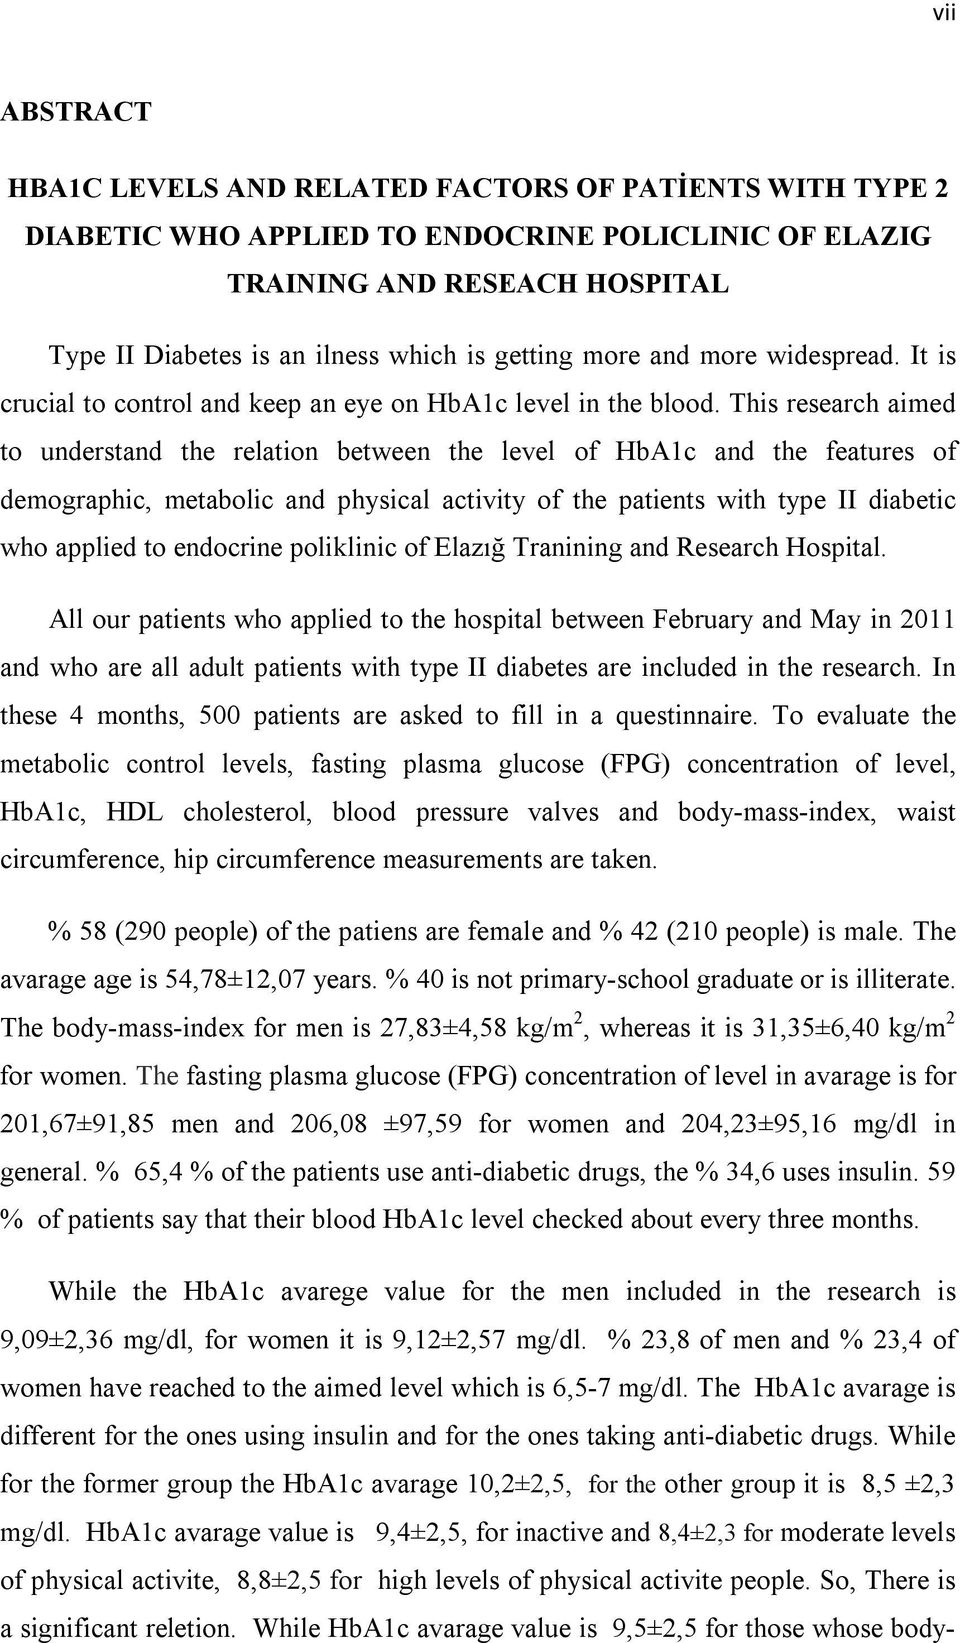 This research aimed to understand the relation between the level of HbA1c and the features of demographic, metabolic and physical activity of the patients with type II diabetic who applied to